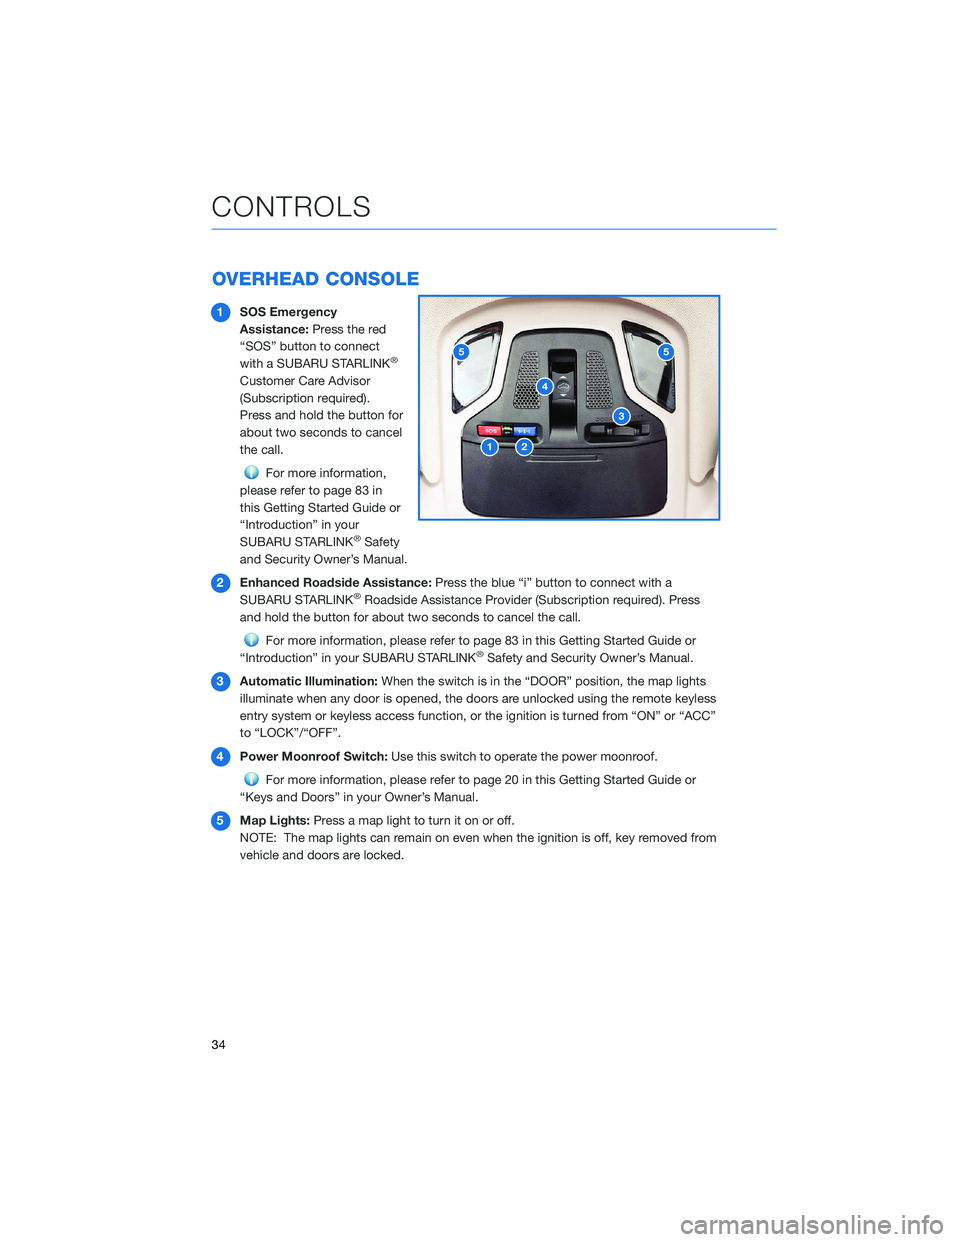 SUBARU LEGACY 2022  Getting Started Guide OVERHEAD CONSOLE
1SOS Emergency
Assistance:Press the red
“SOS” button to connect
with a SUBARU STARLINK
®
Customer Care Advisor
(Subscription required).
Press and hold the button for
about two se